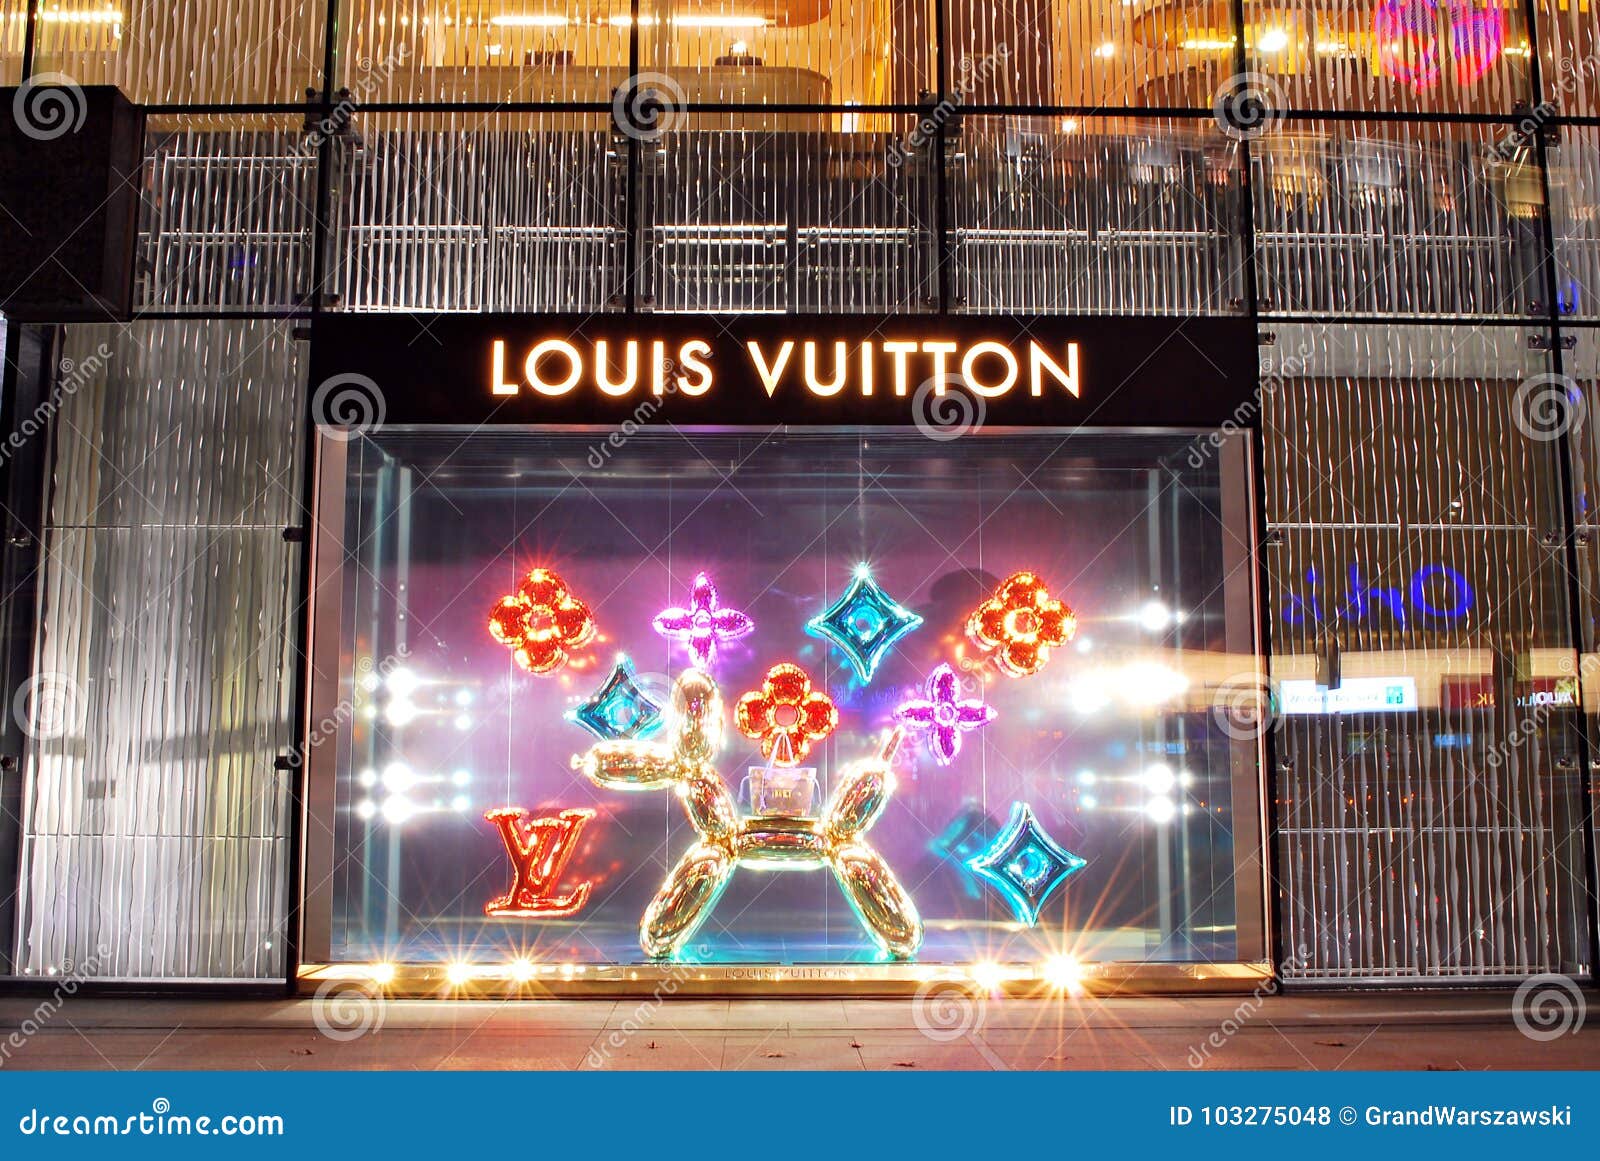 Louis Vuitton store. editorial stock photo. Image of consumer - 103275048